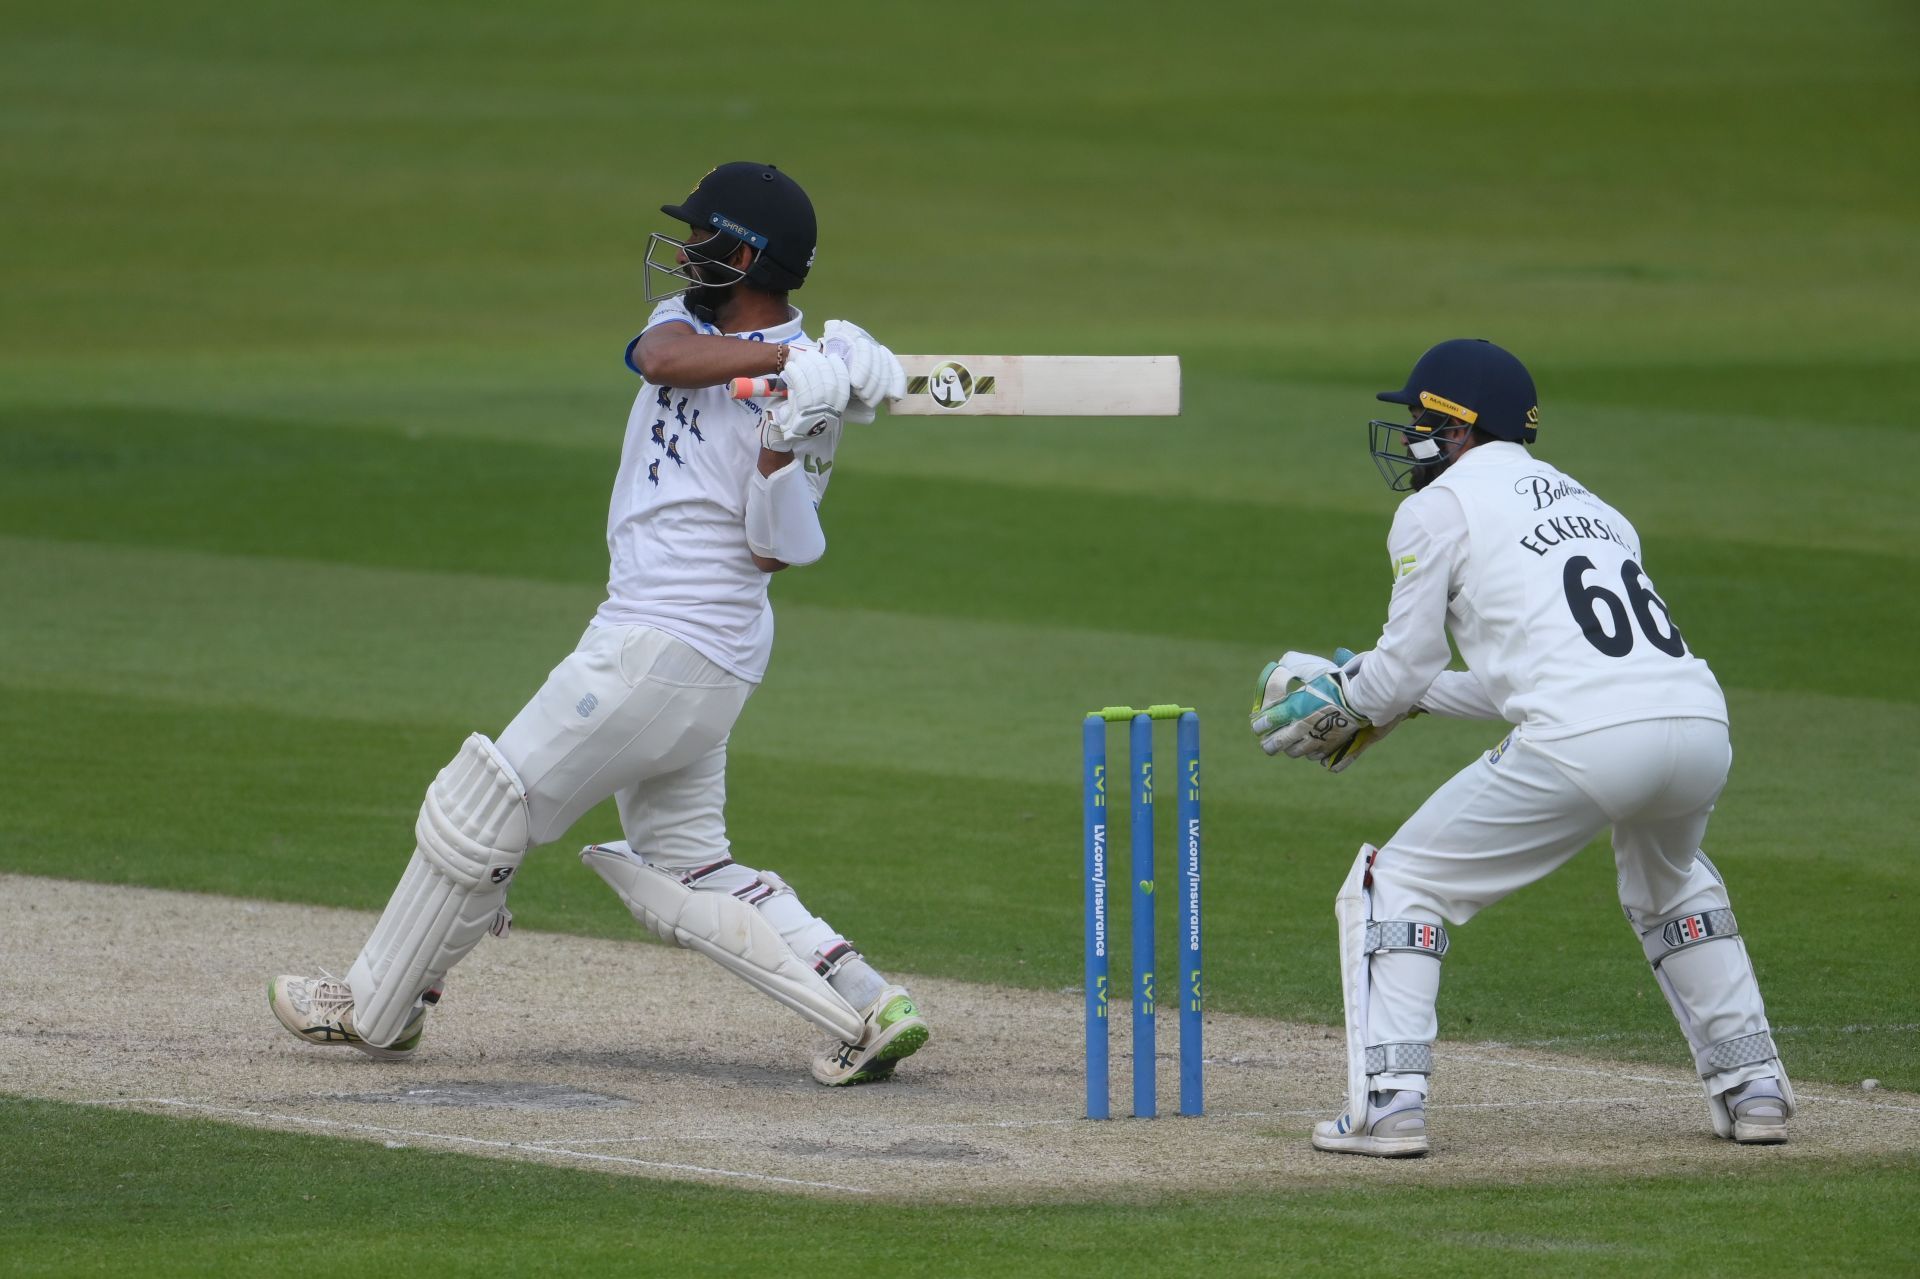 Pujara has scored 531 runs off 964 deliveries (160.4 overs) at an average of 133.67 in the ongoing county championship